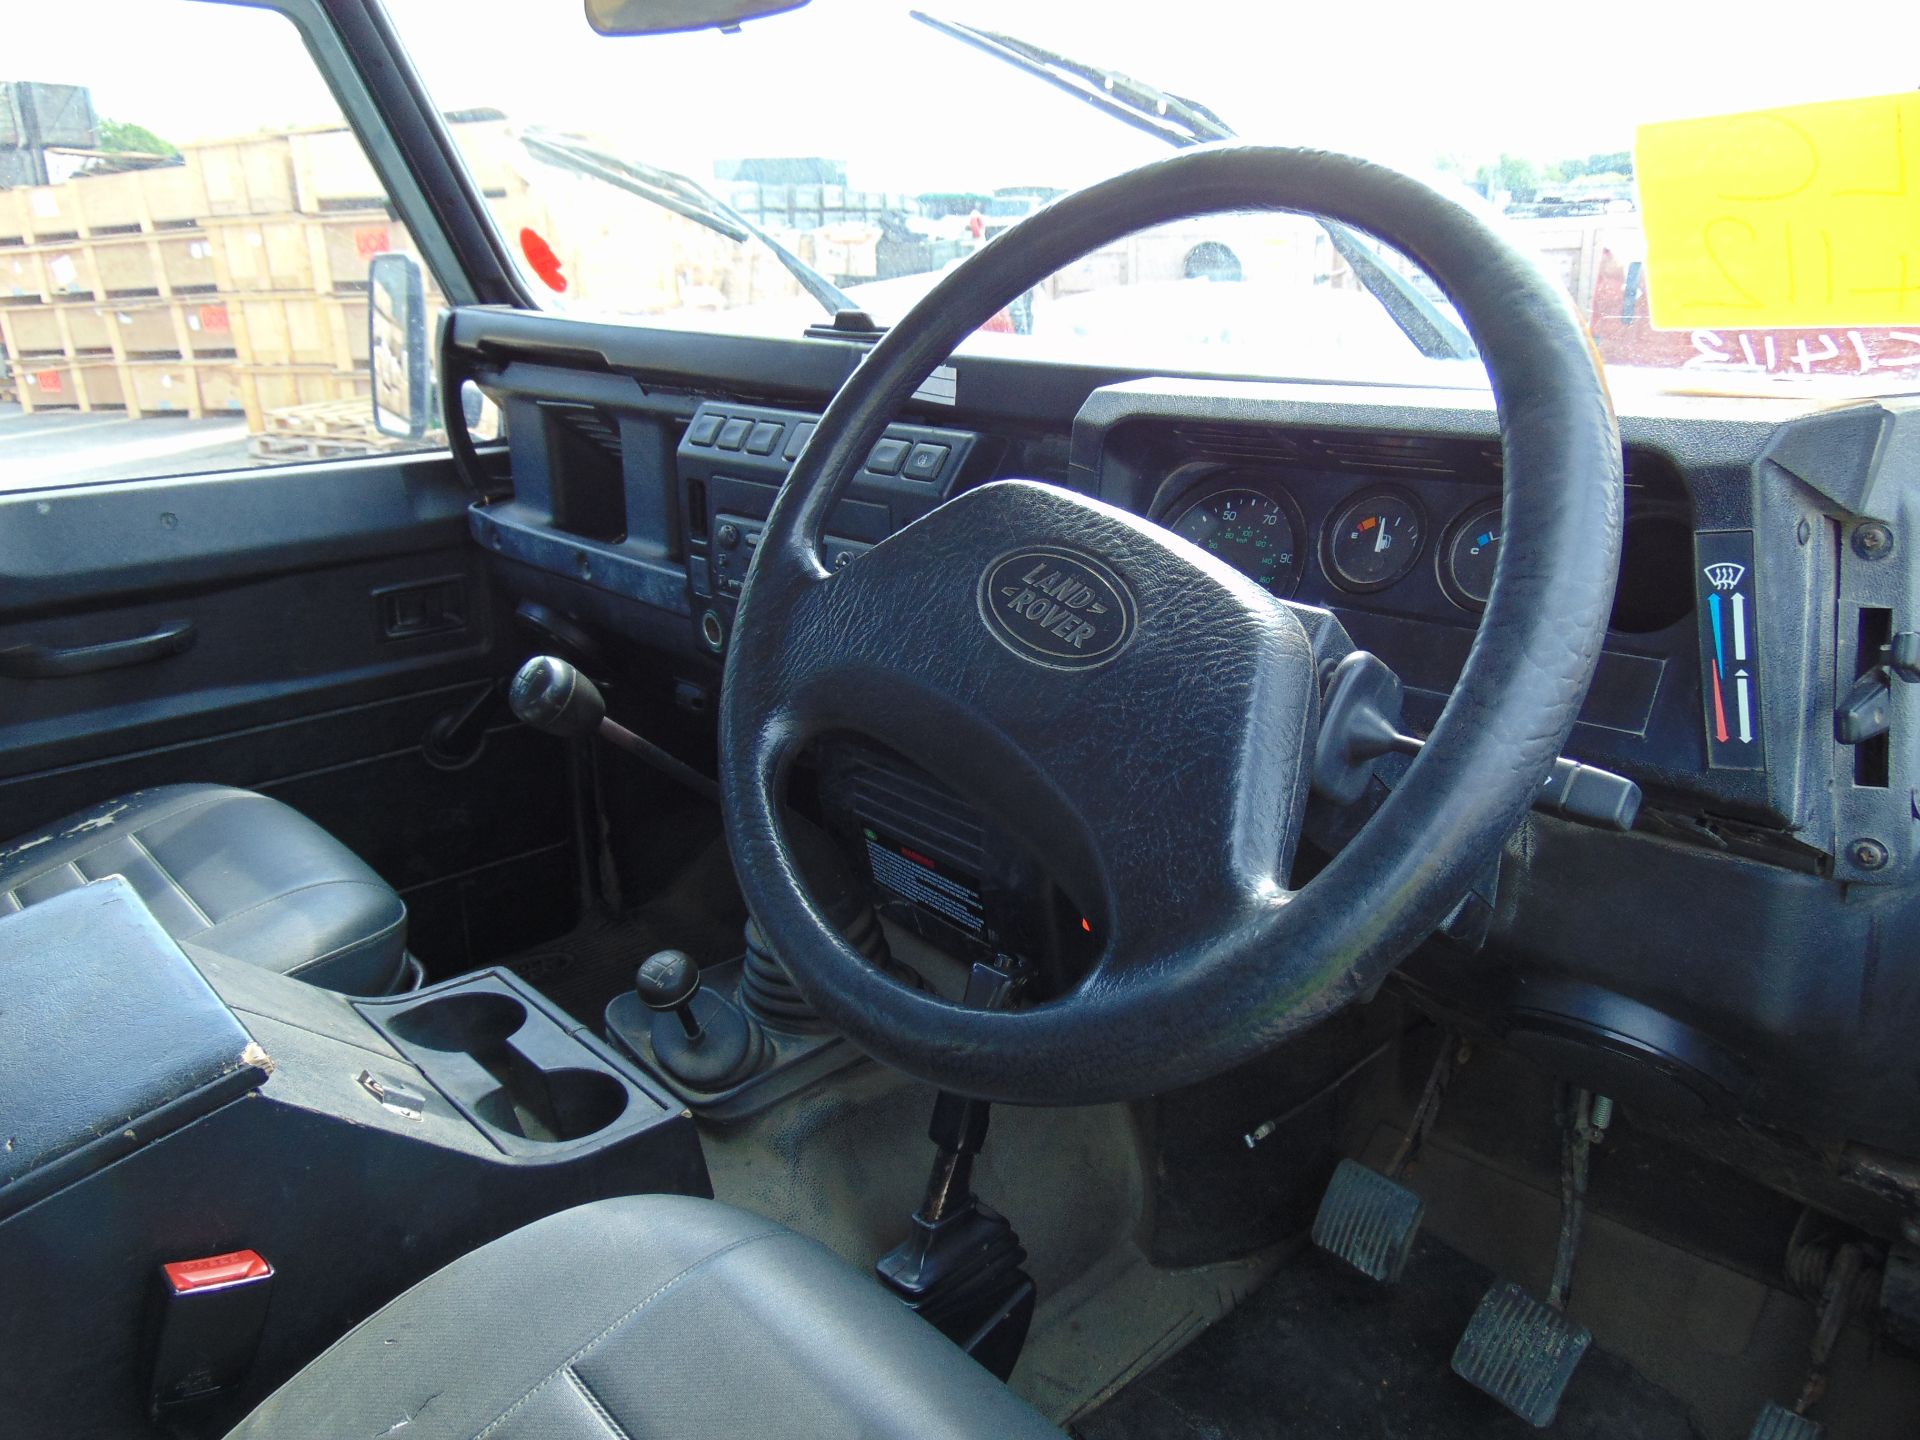 Land Rover Defender 130 TD5 Double Cab Pick Up - Image 10 of 17